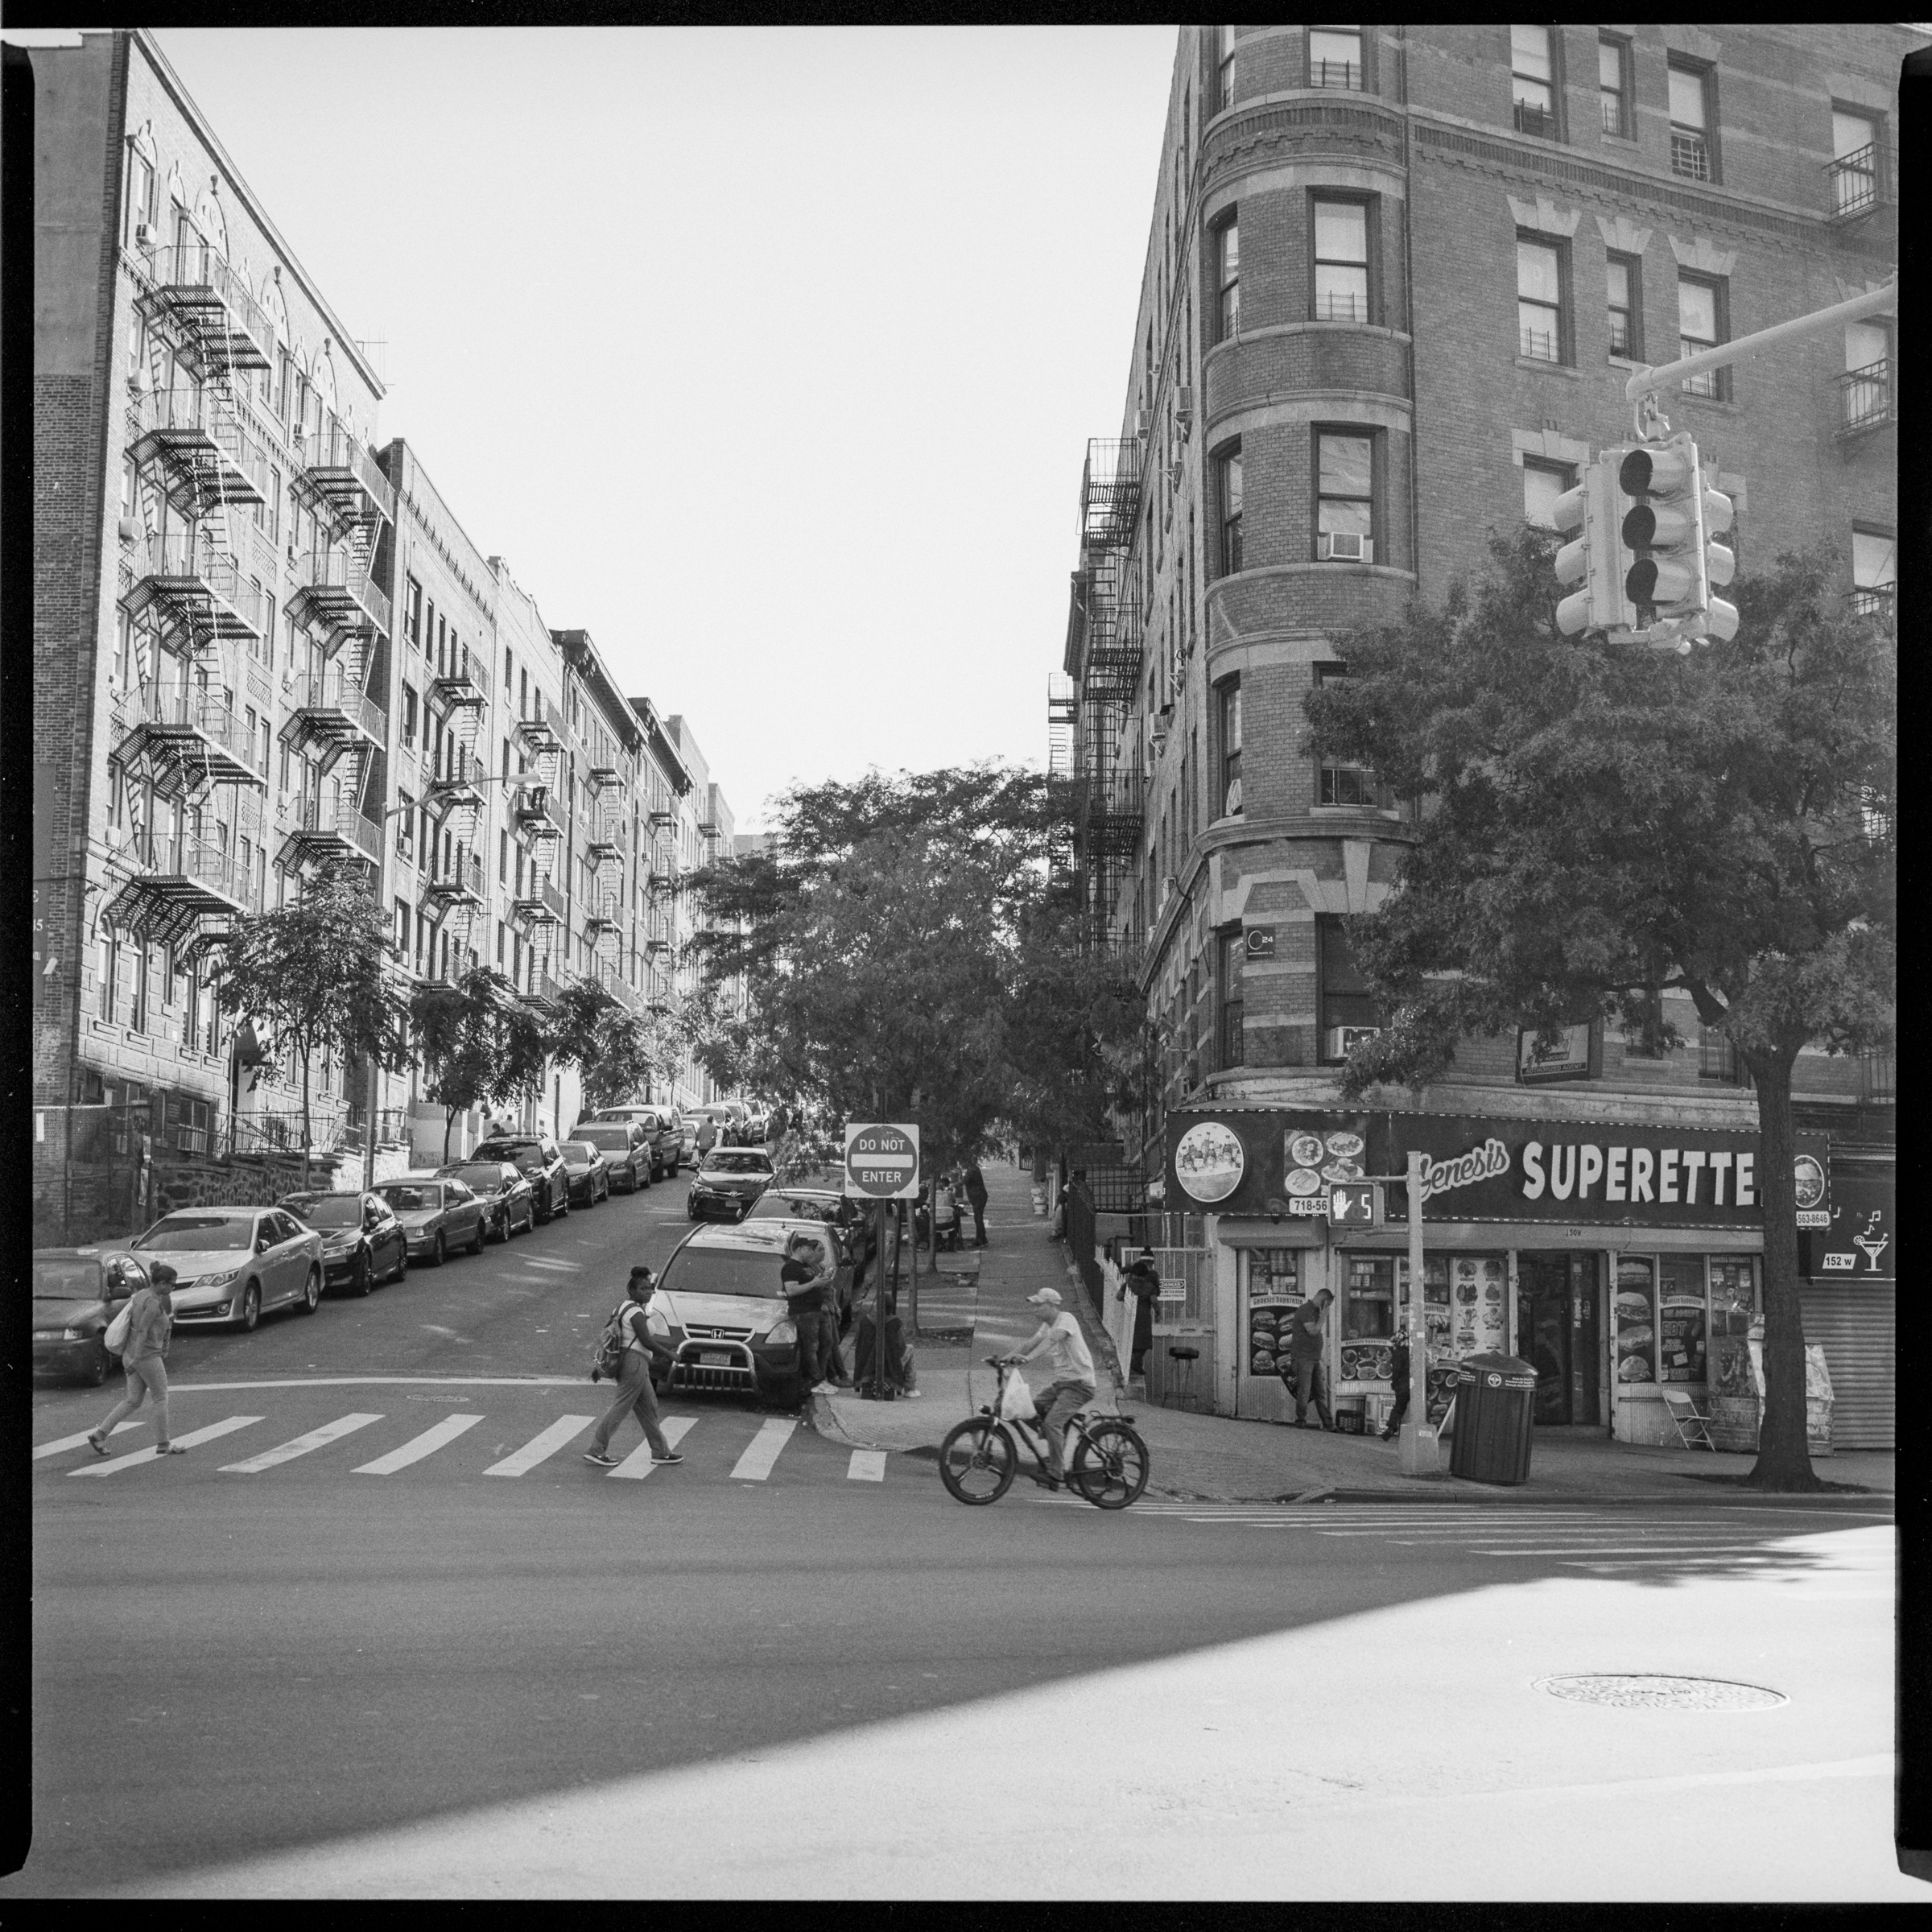 Image description: Black and white photograph of an urban street corner. A bodega storefront has the sign “Genesis Superette”. A bicycle and two pedestrians are crossing in front of the camera. A steep hill lined with apartment buildings recedes in the background.